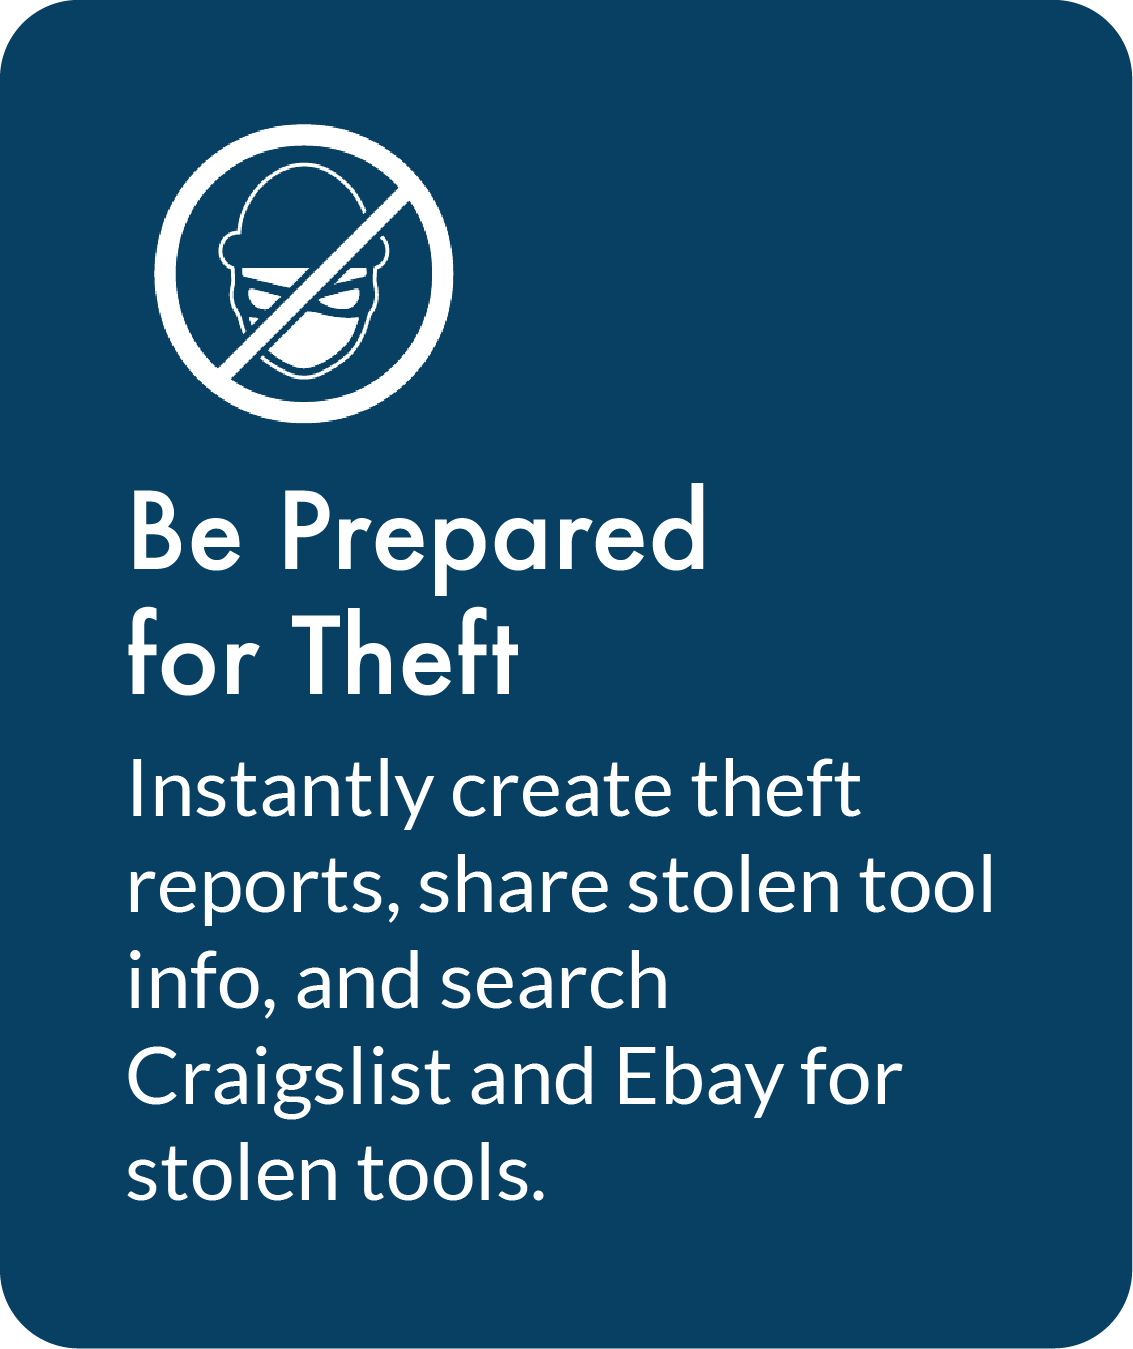 Be Prepared for Theft. Instantly create theft reports, share stolen tool info, and search Craigslist and Ebay for stolen tools.